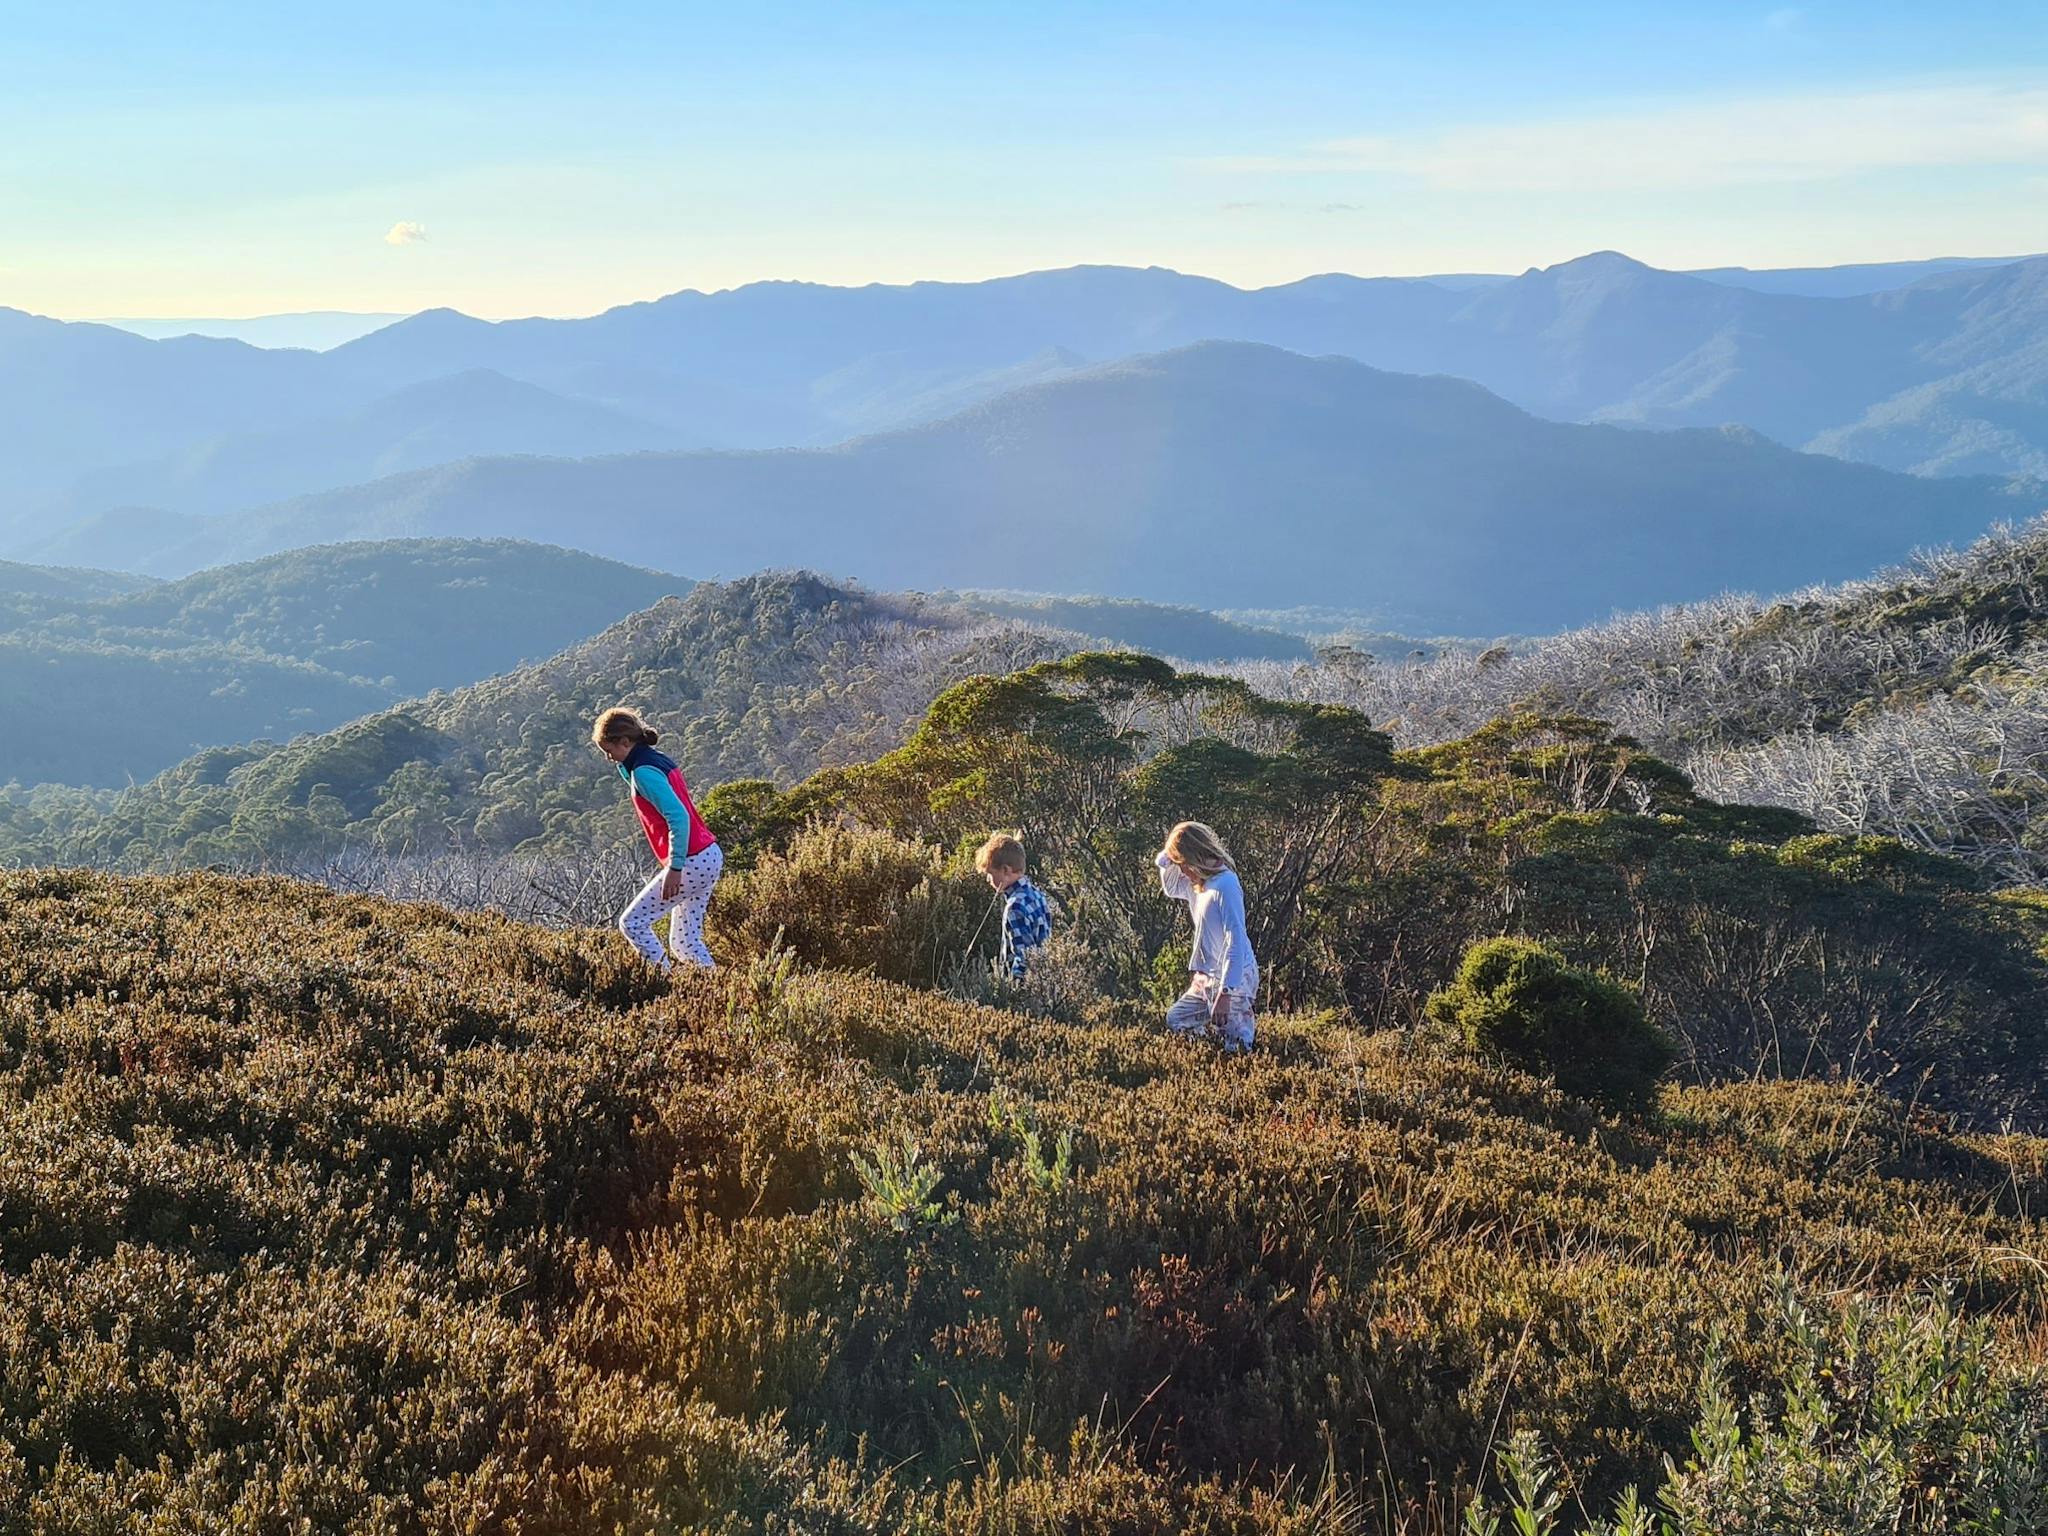 Children looking for Easter Eggs with The Crosscut Saw mountain range as a backdrop.